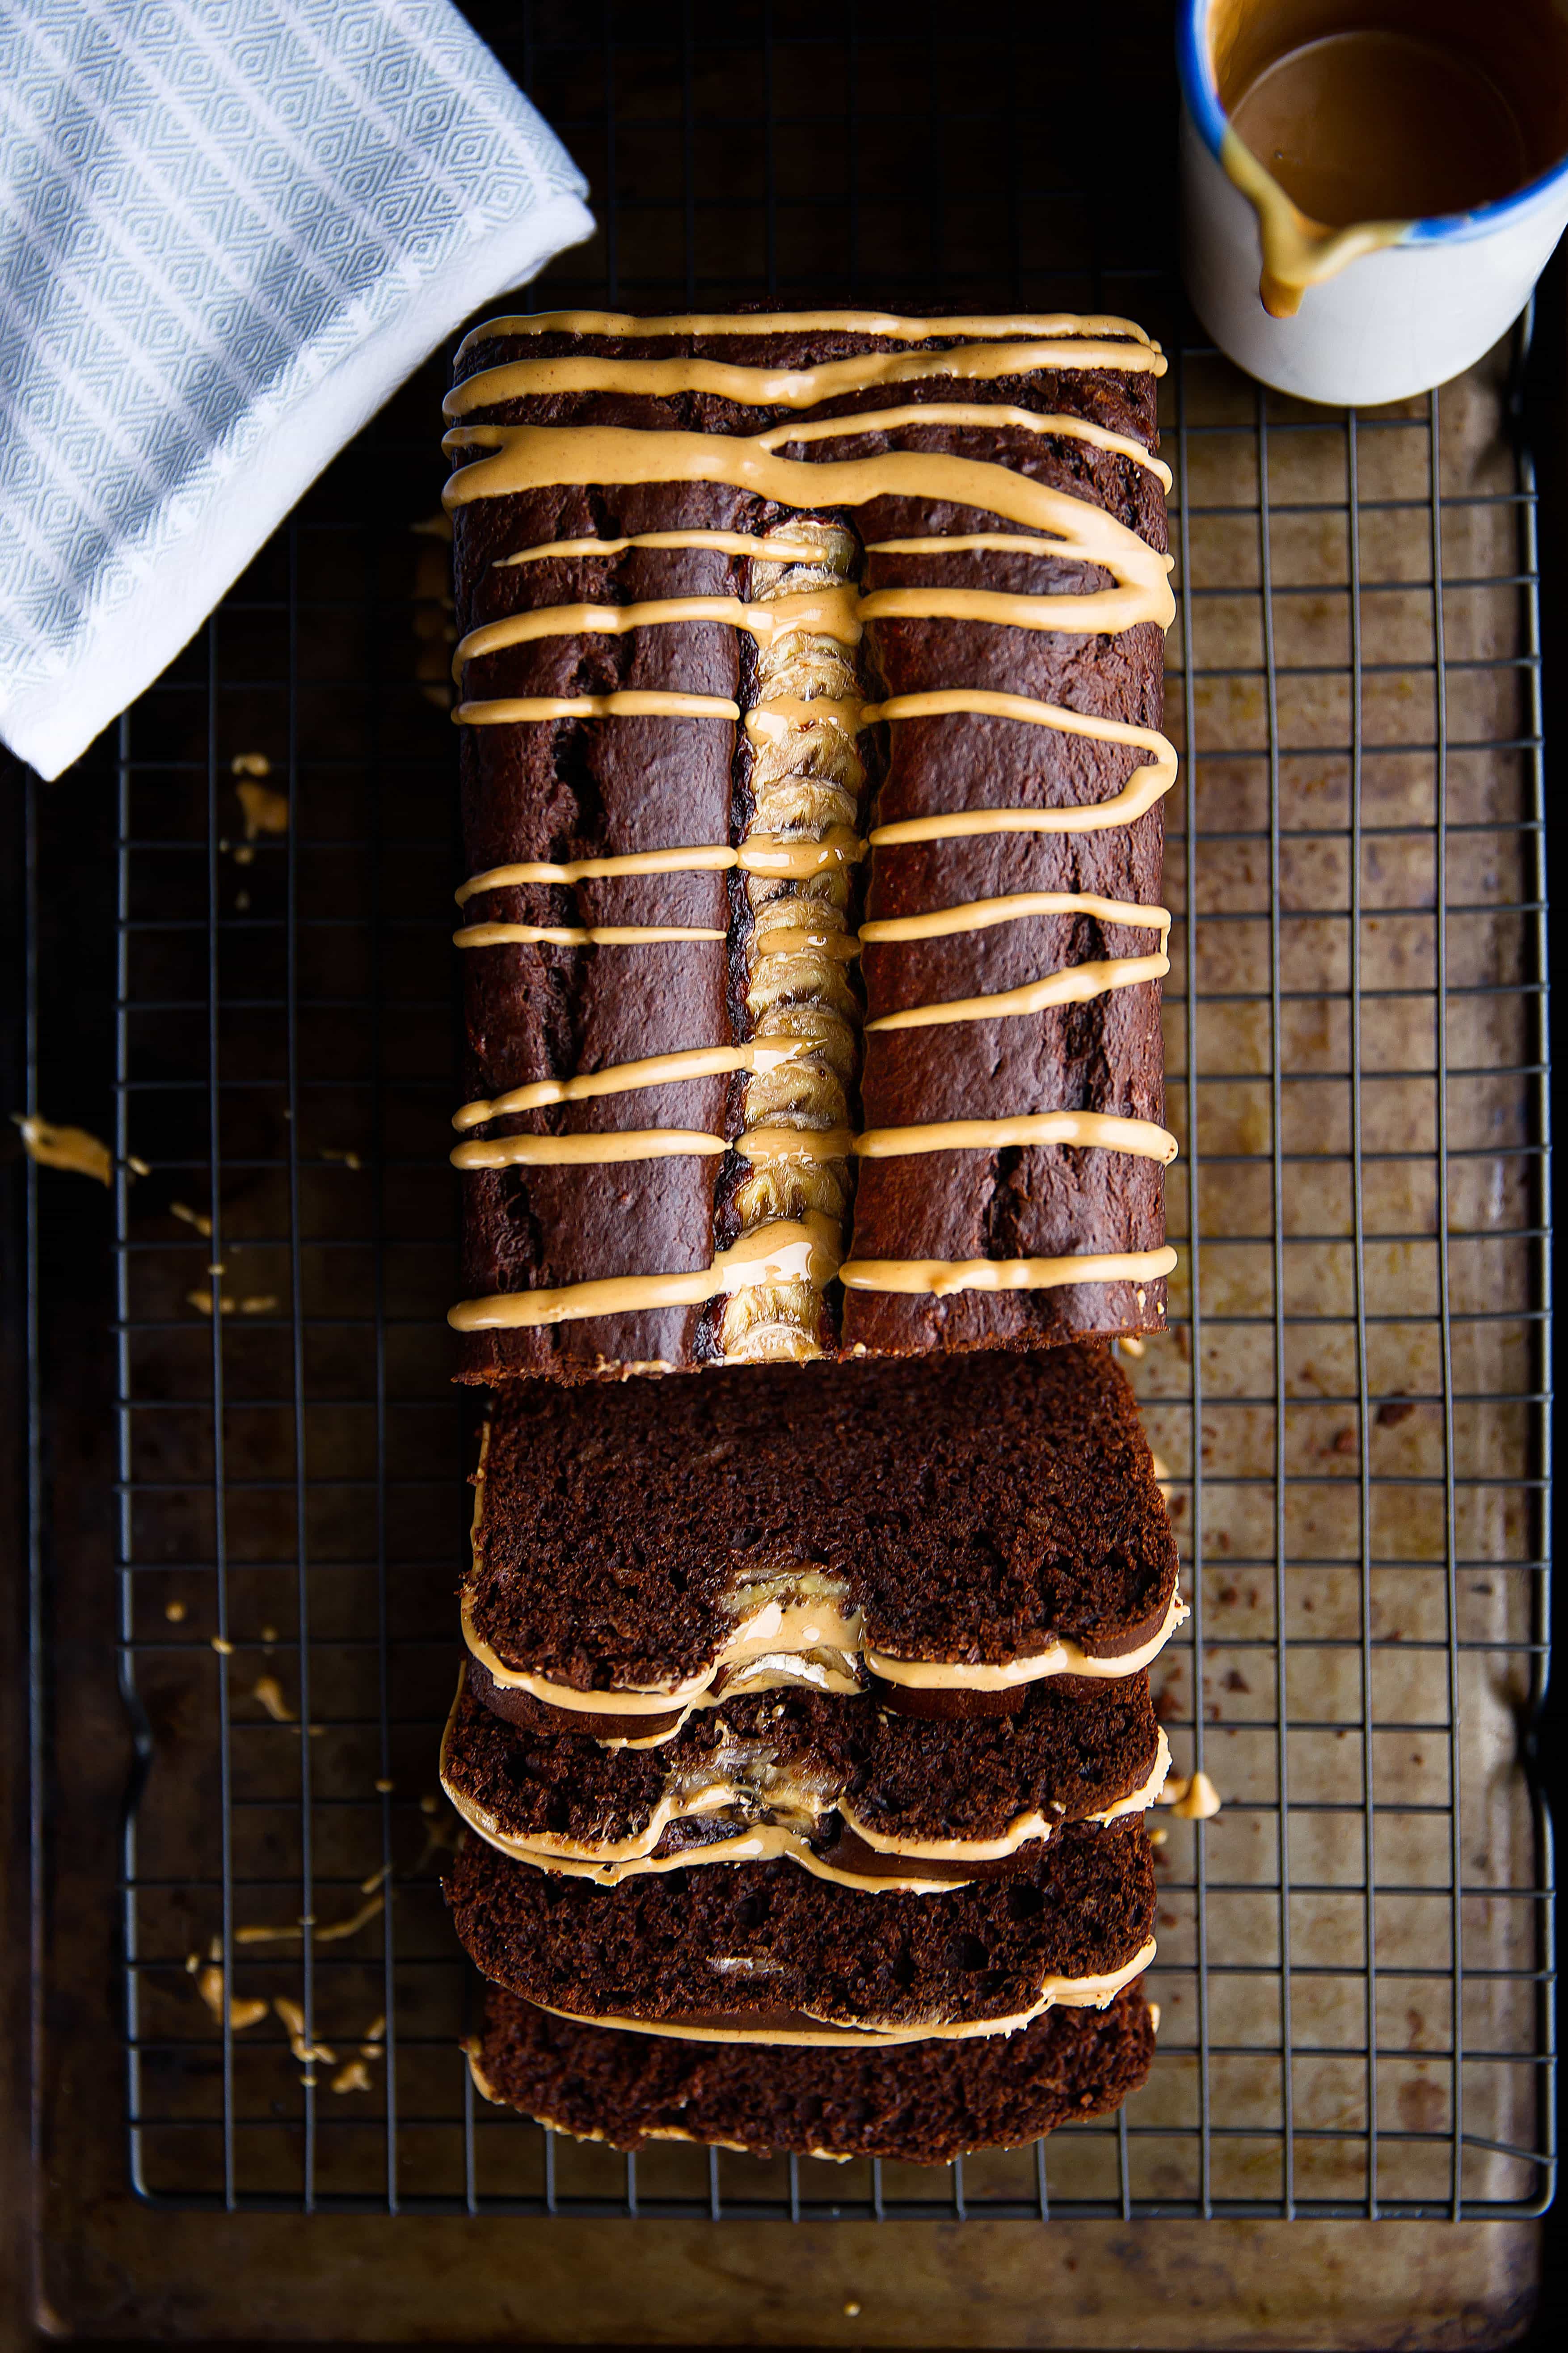 All my favorite flavors wrapped up into one quick bread? This decadent Peanut Butter Chocolate Banana Bread has us DROOLING.